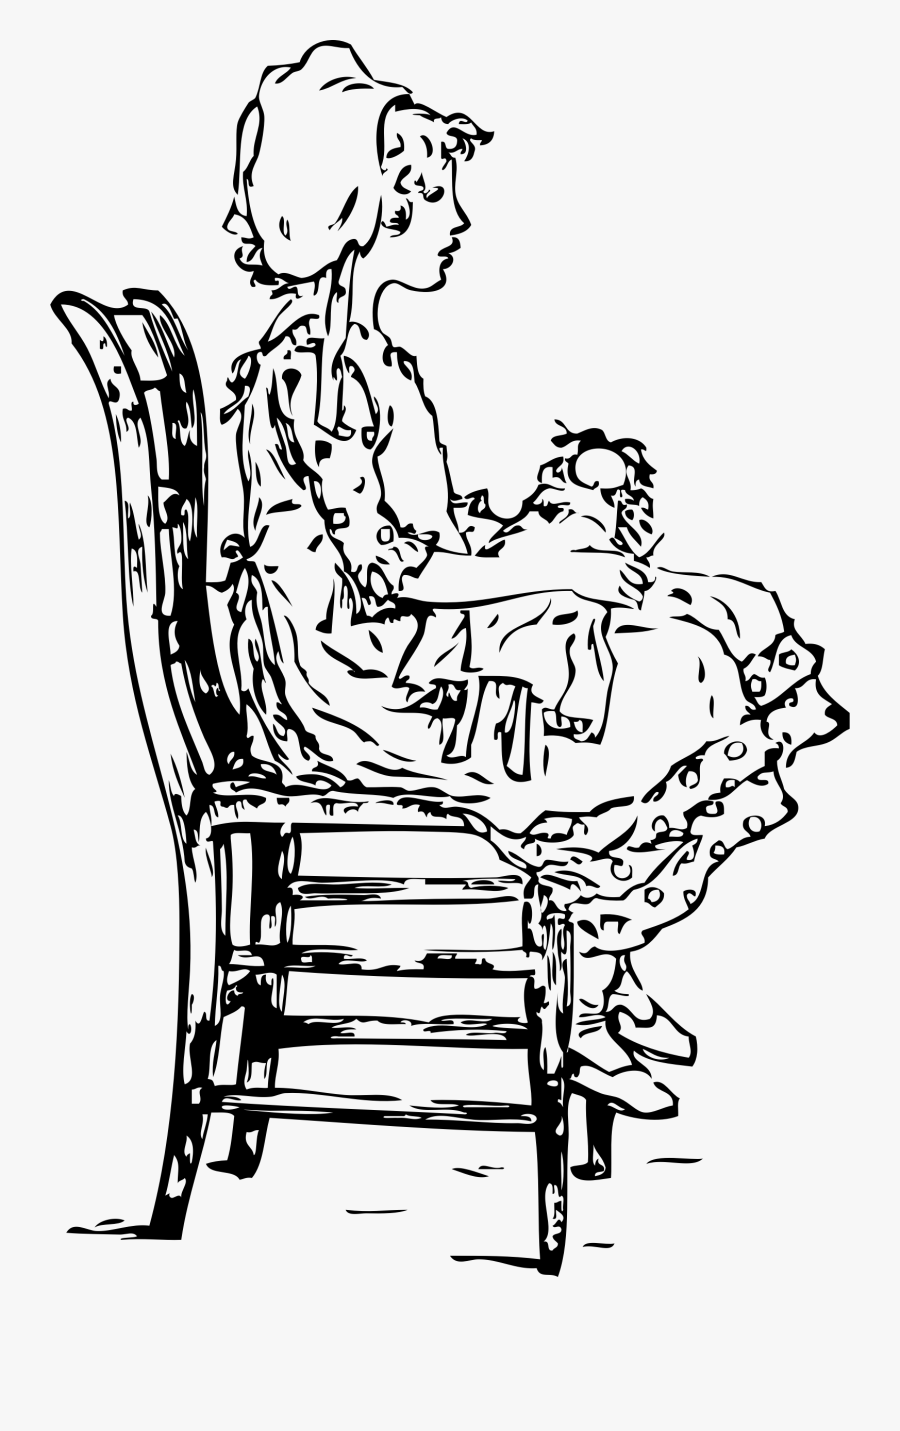 Girl Sitting On A Chair - Girl Sitting On A Chair Drawing, Transparent Clipart